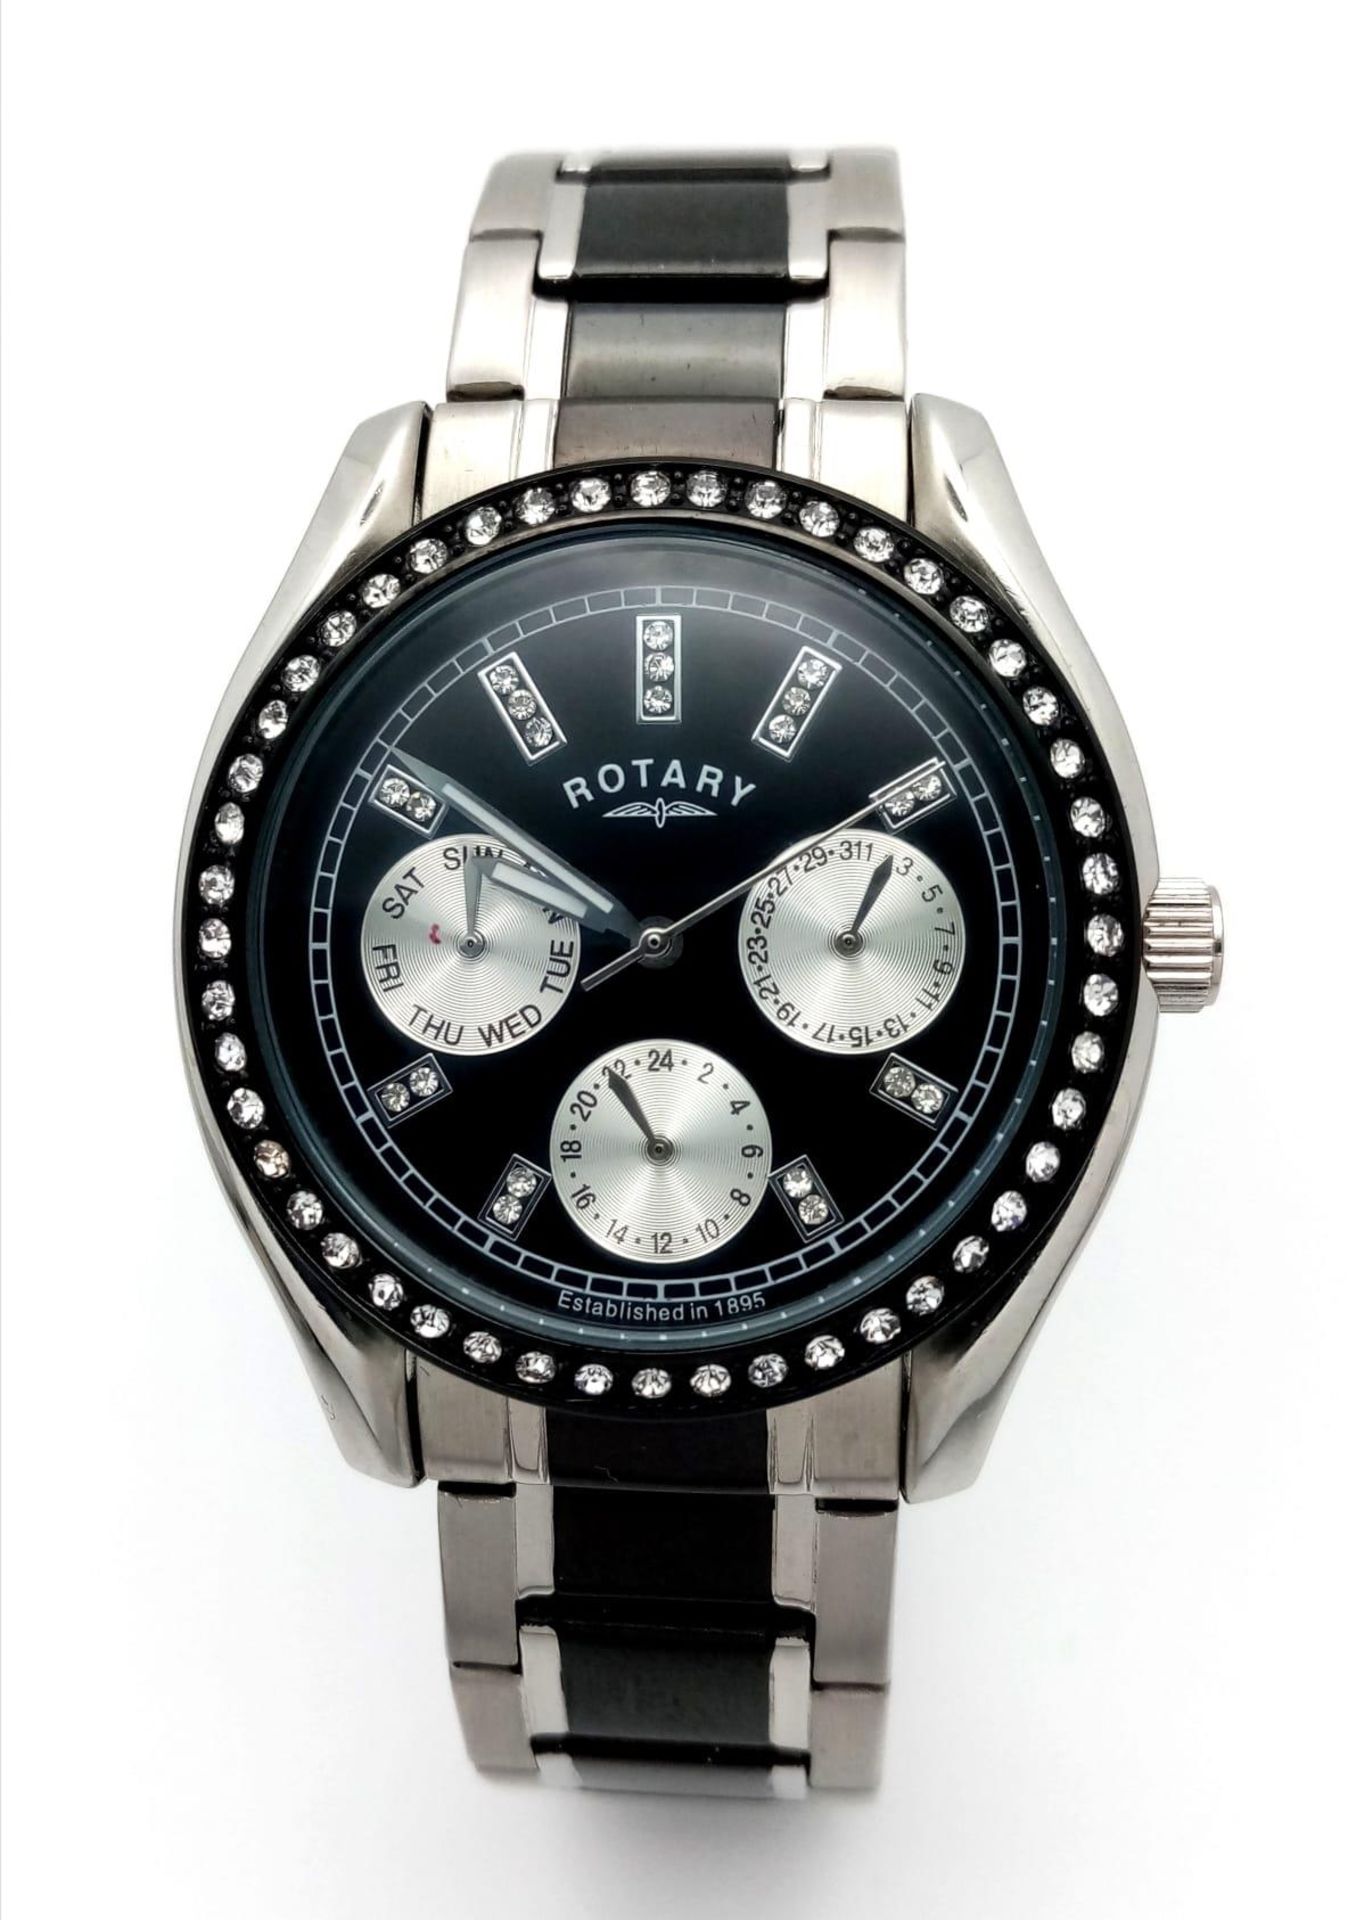 An Excellent Condition Stainless Steel Rotary, Stone Set Bezel, Quartz Watch Model LB04337. 39mm